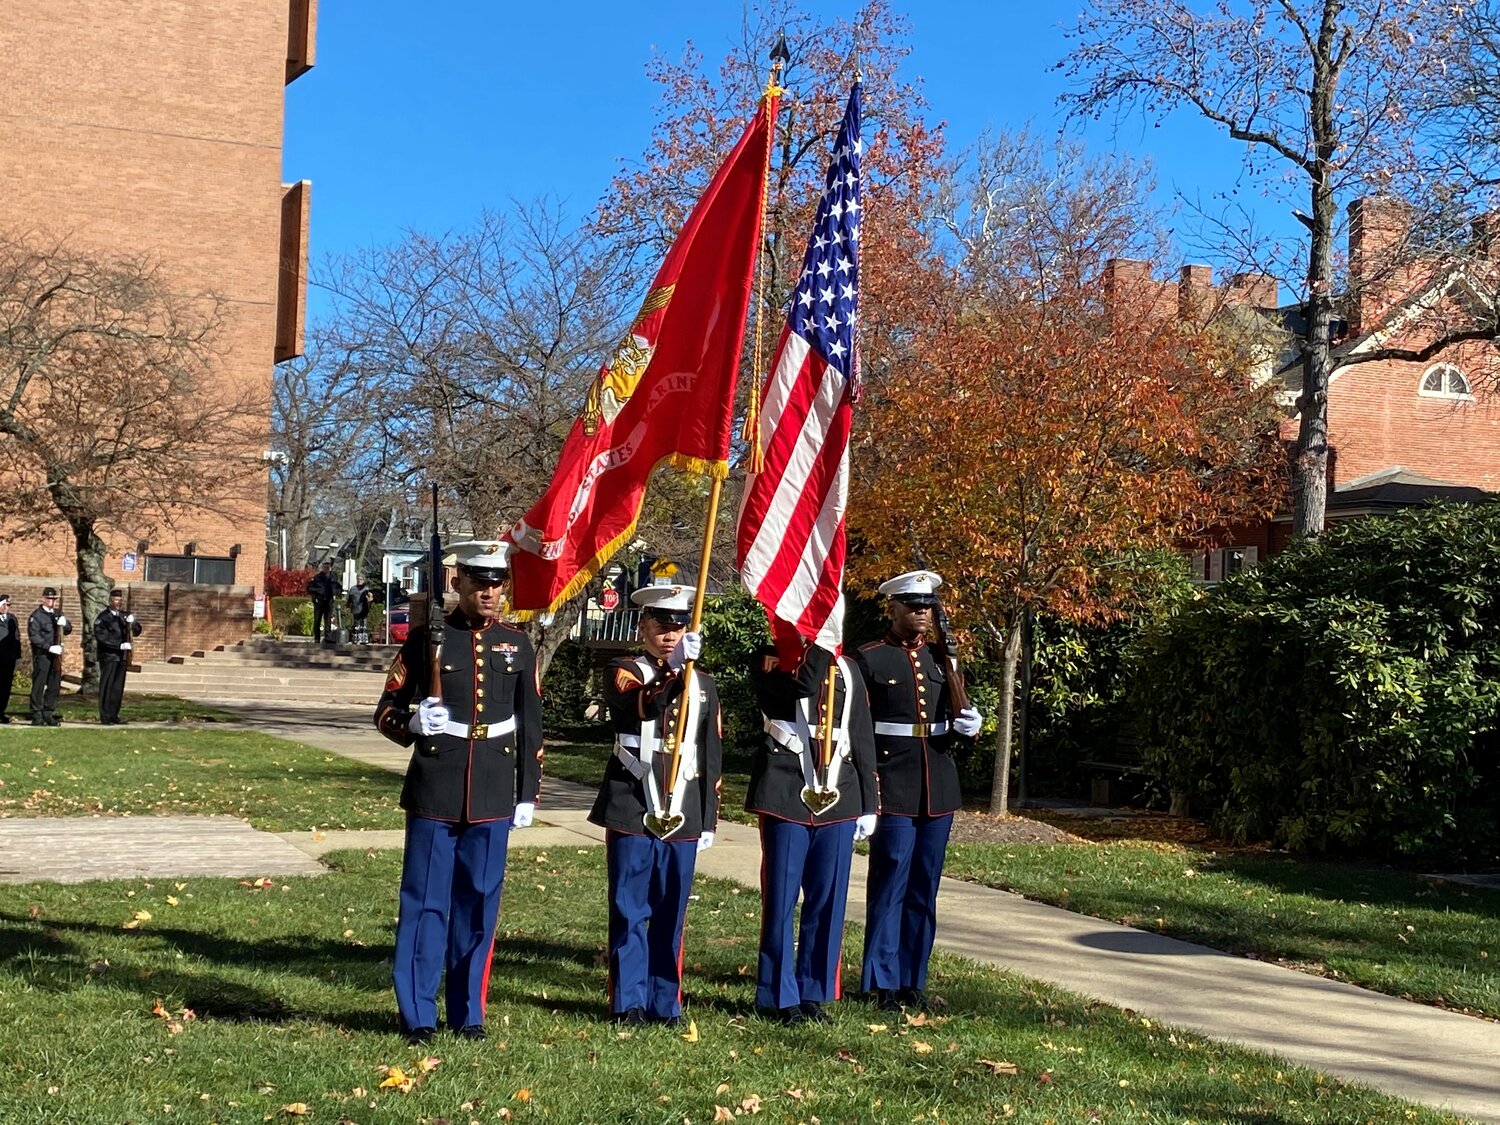 A U.S. Marine Corps color guard attended the 70th anniversary of the Korean War Armistice in Doylestown on Saturday.